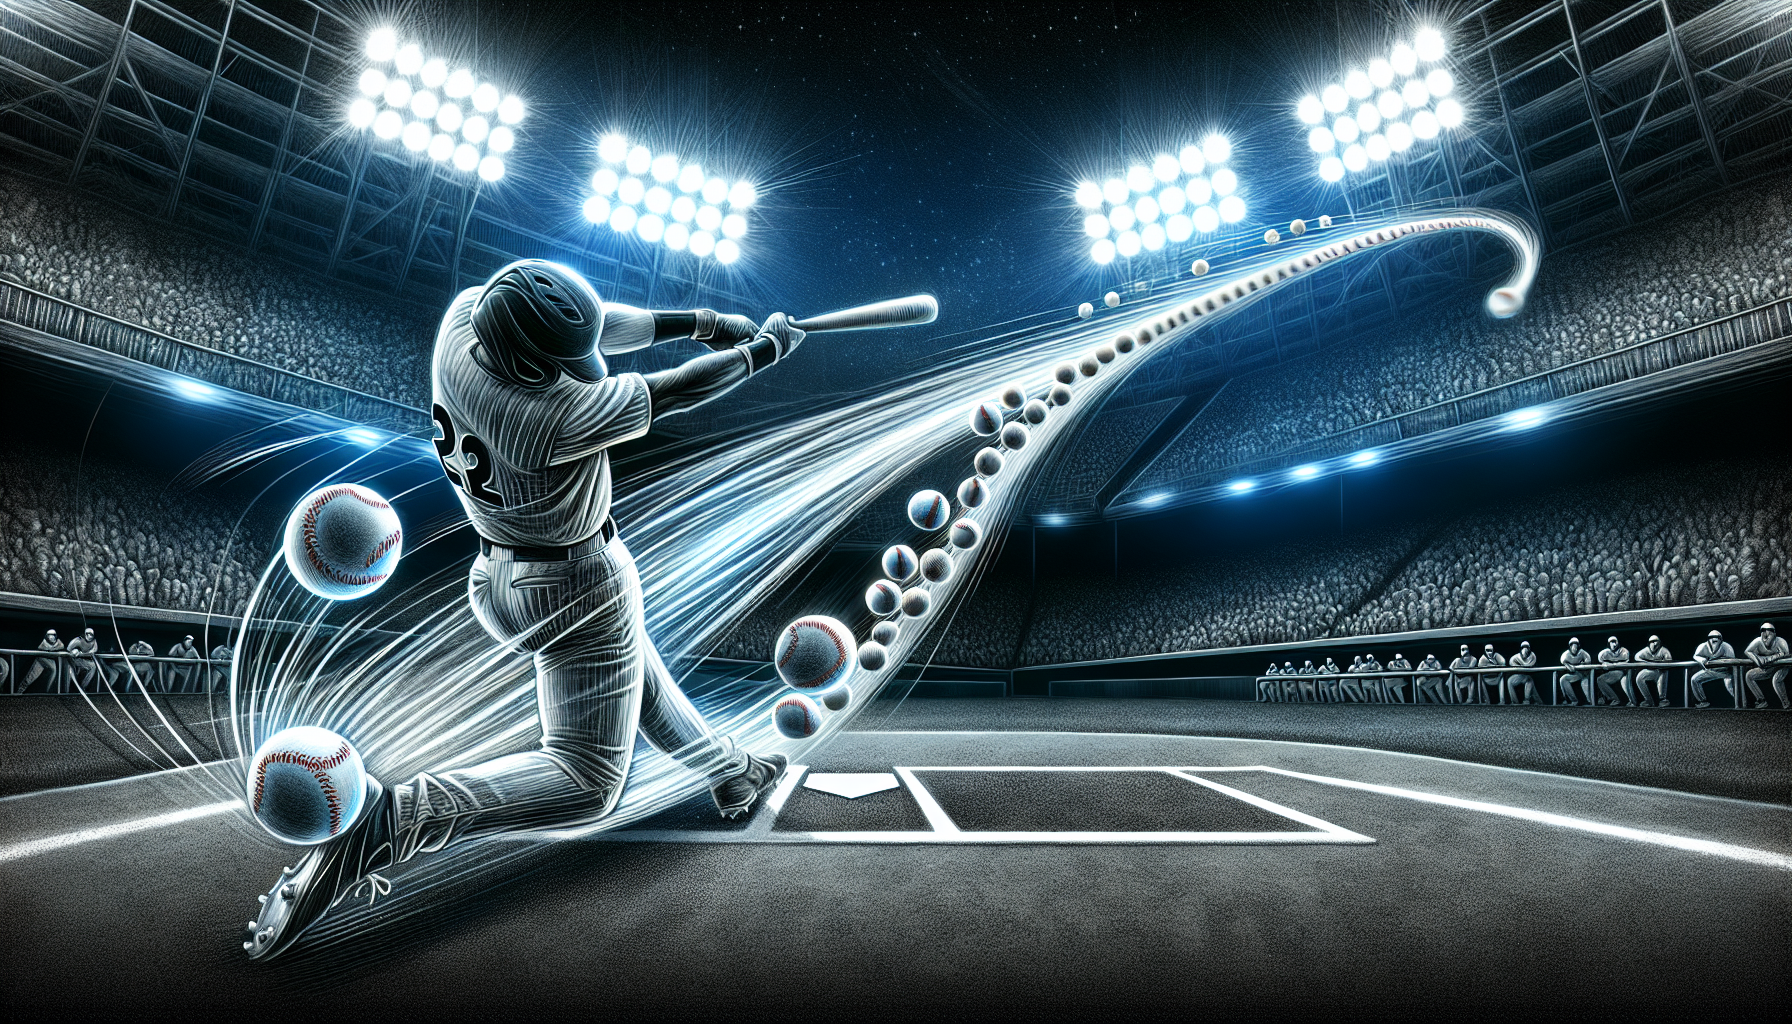 Illustration of baseball player hitting a clutch hit